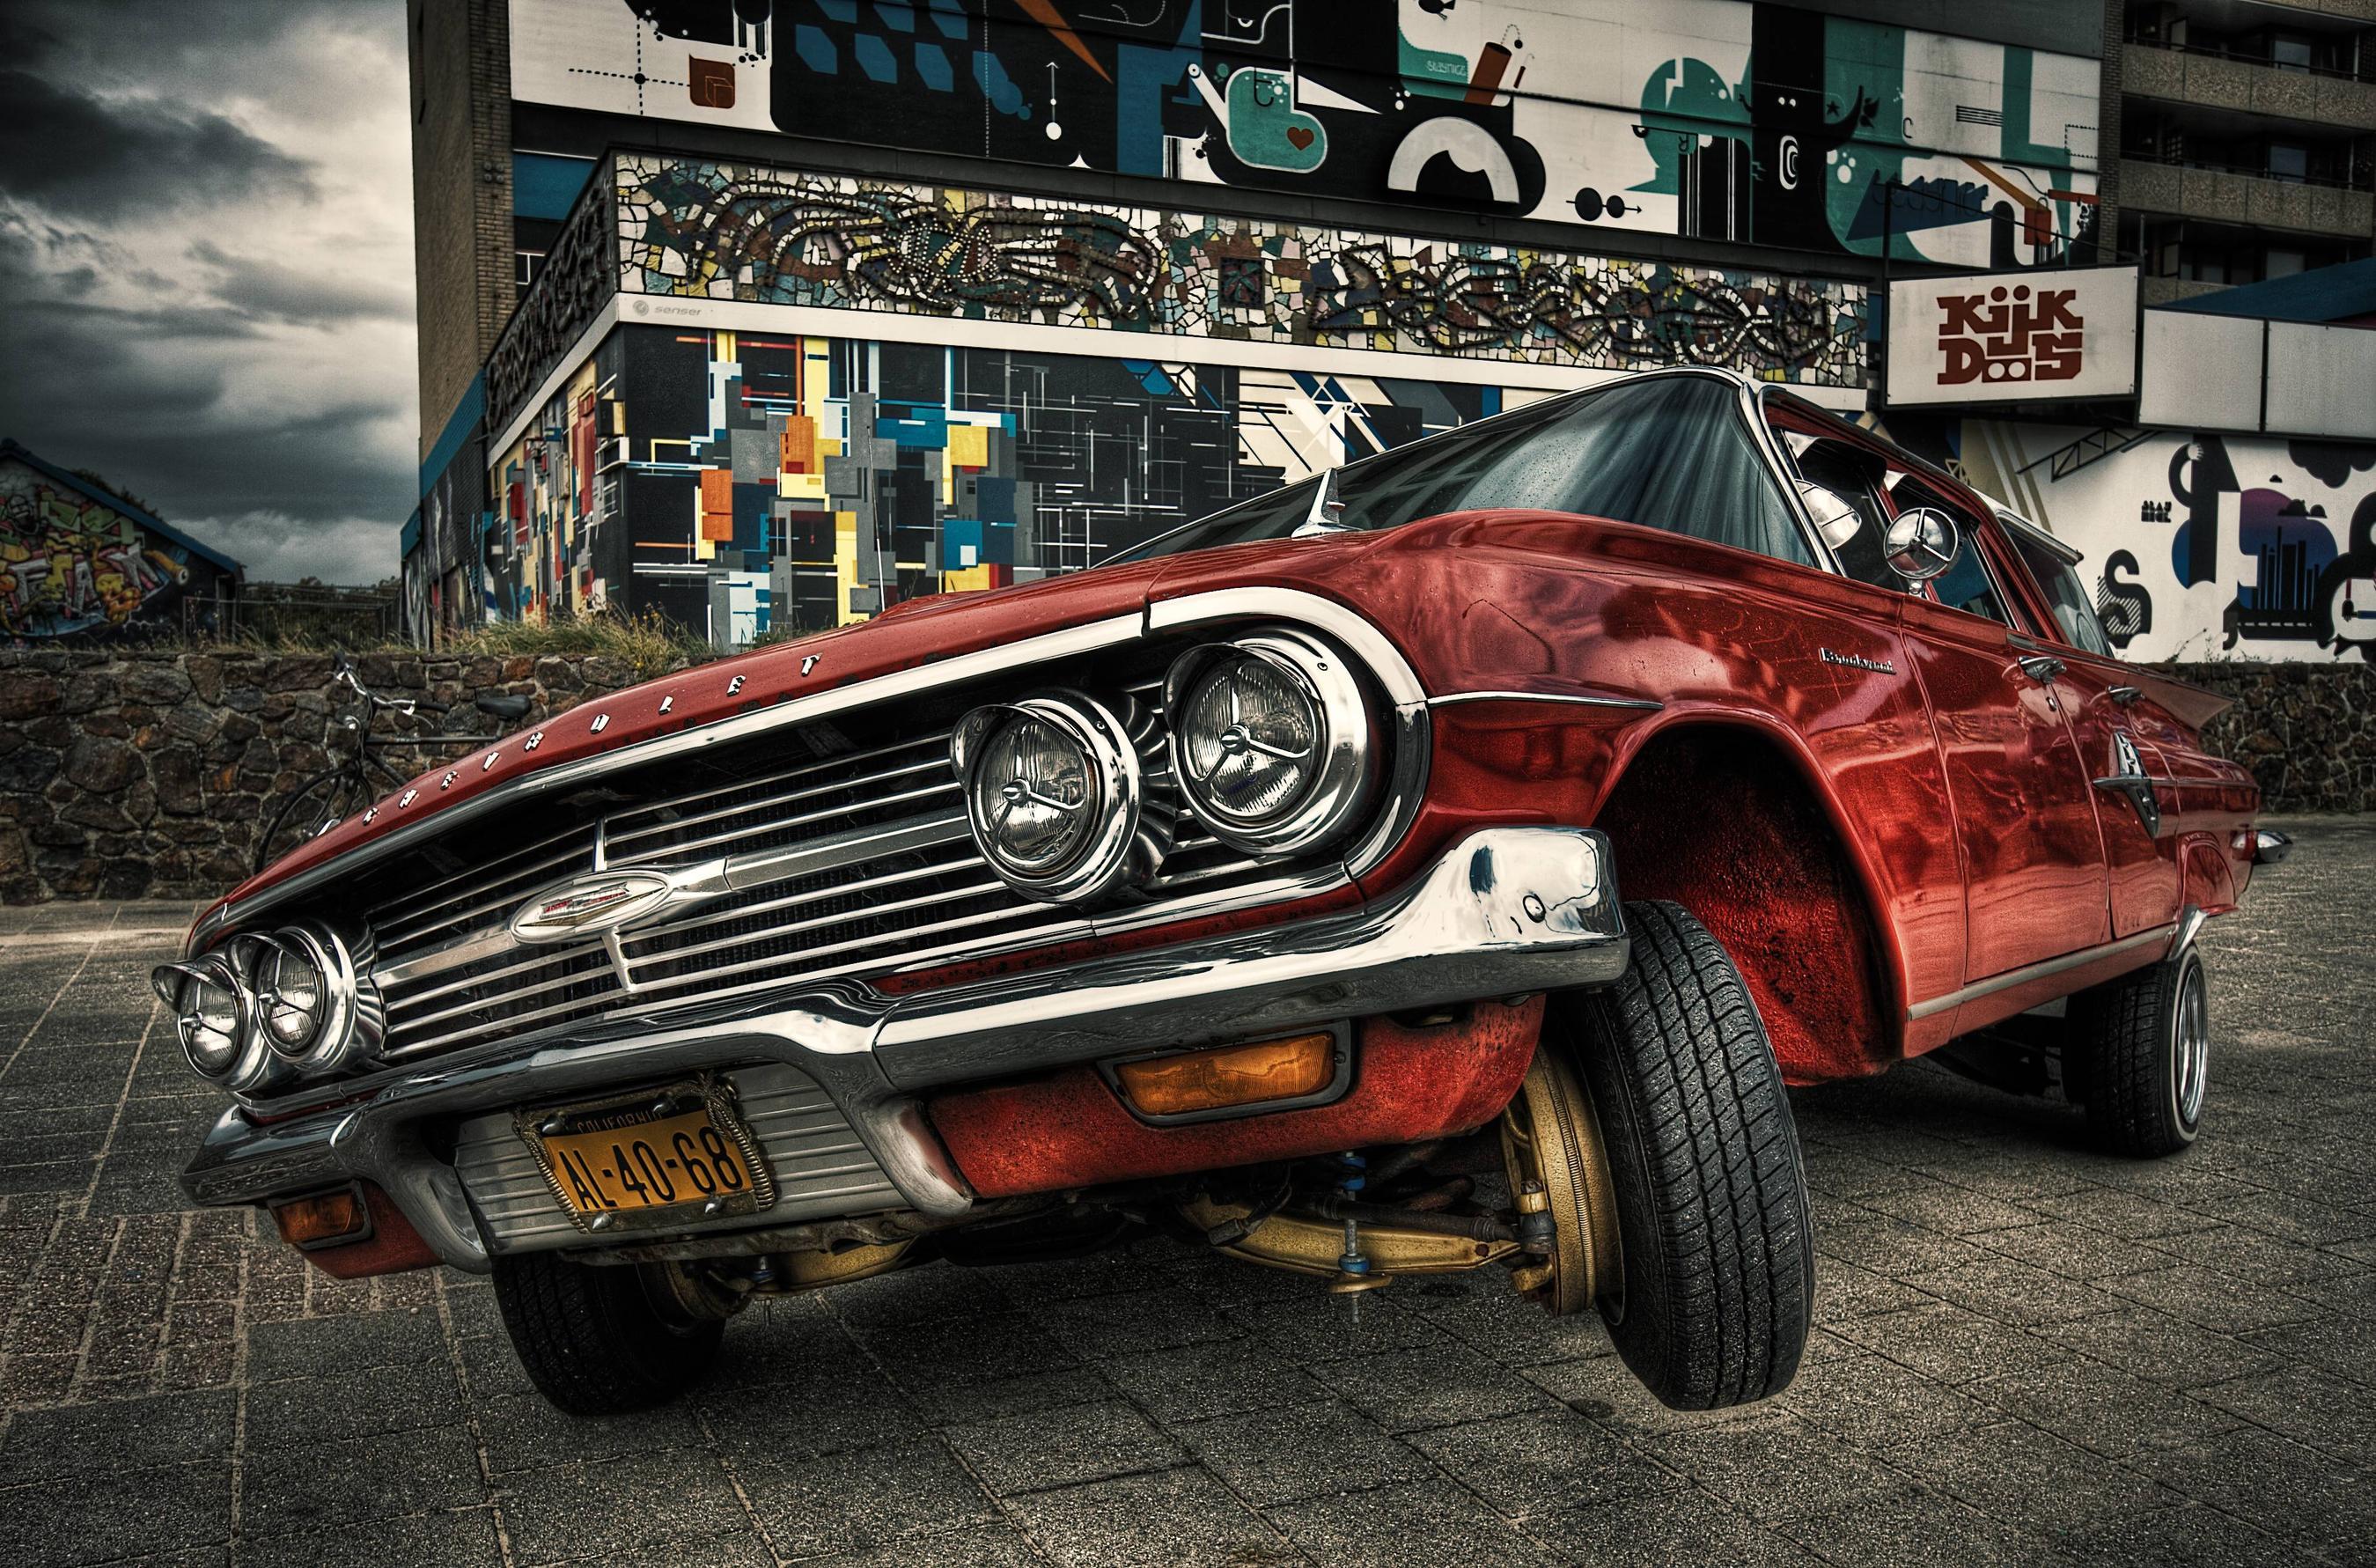 Lowrider Wallpaper, 49 Full High Quality Lowrider Wallpaper In